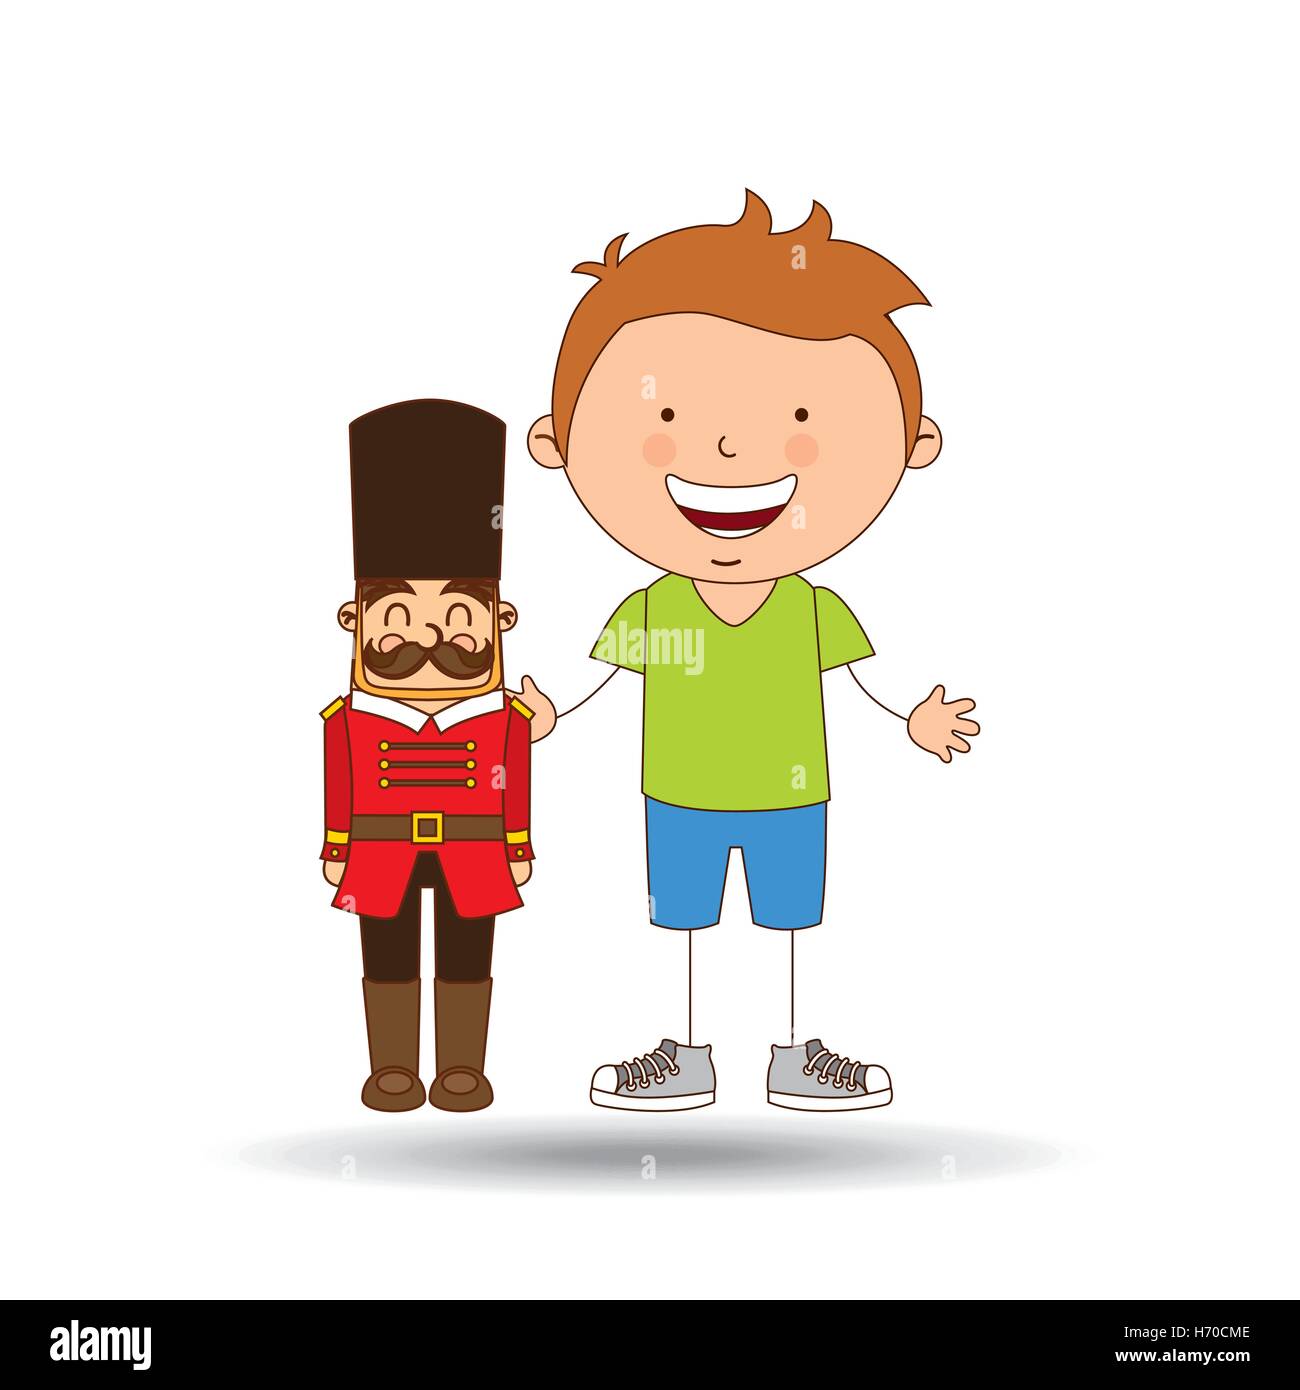 boy lovely smiling wooden soldier graphic vector illustration eps 10 Stock Vector